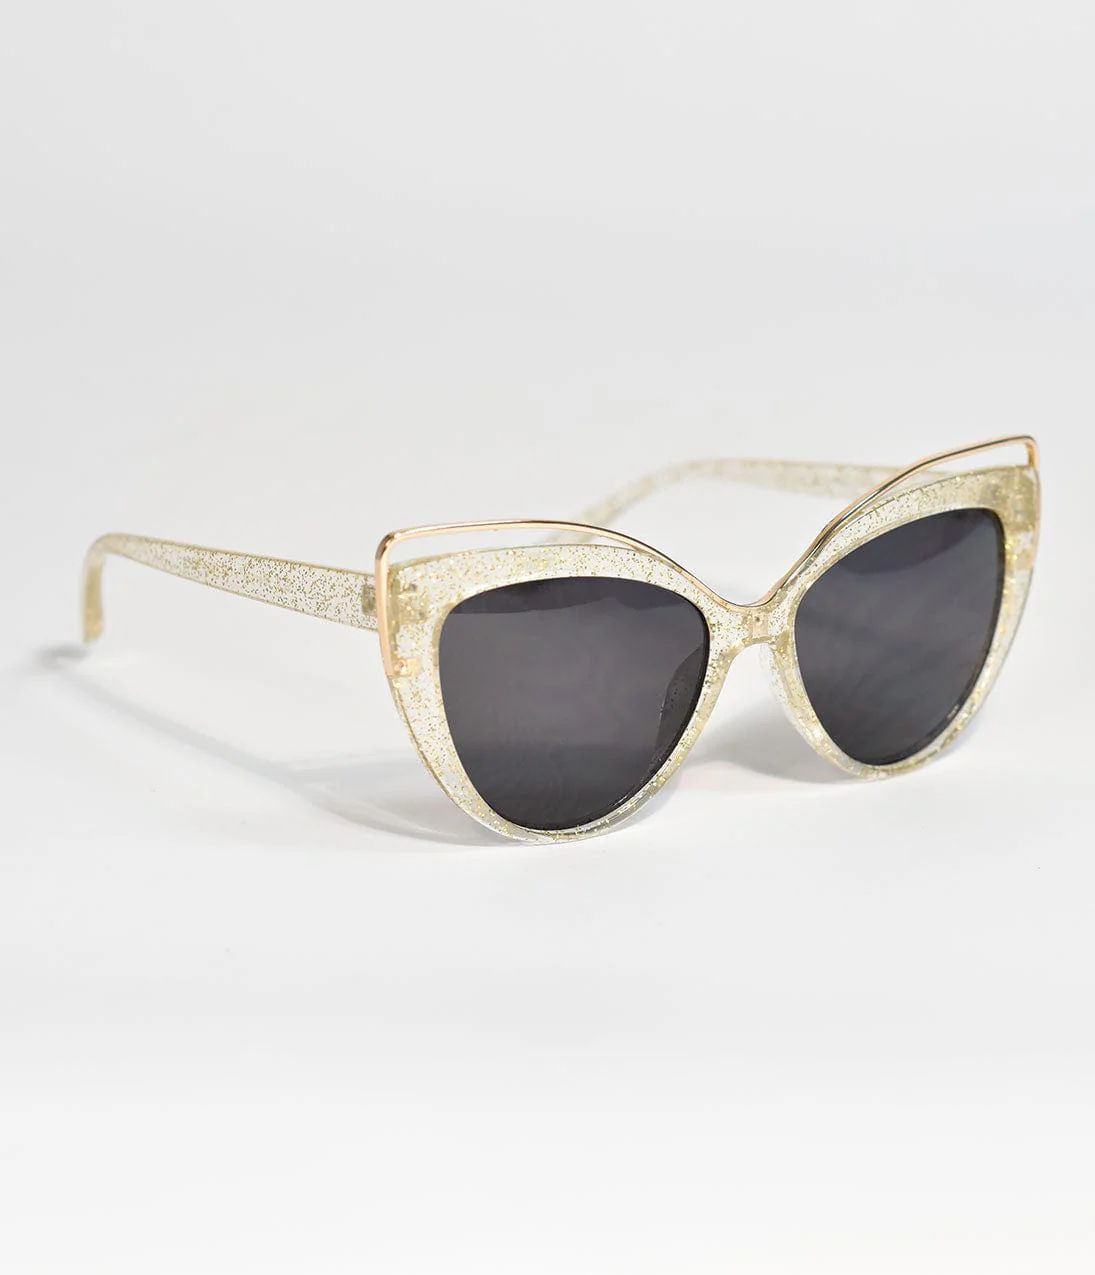 Crystal Glitter Groovy Baby Cat Eye Sunglasses | UniqueVintage